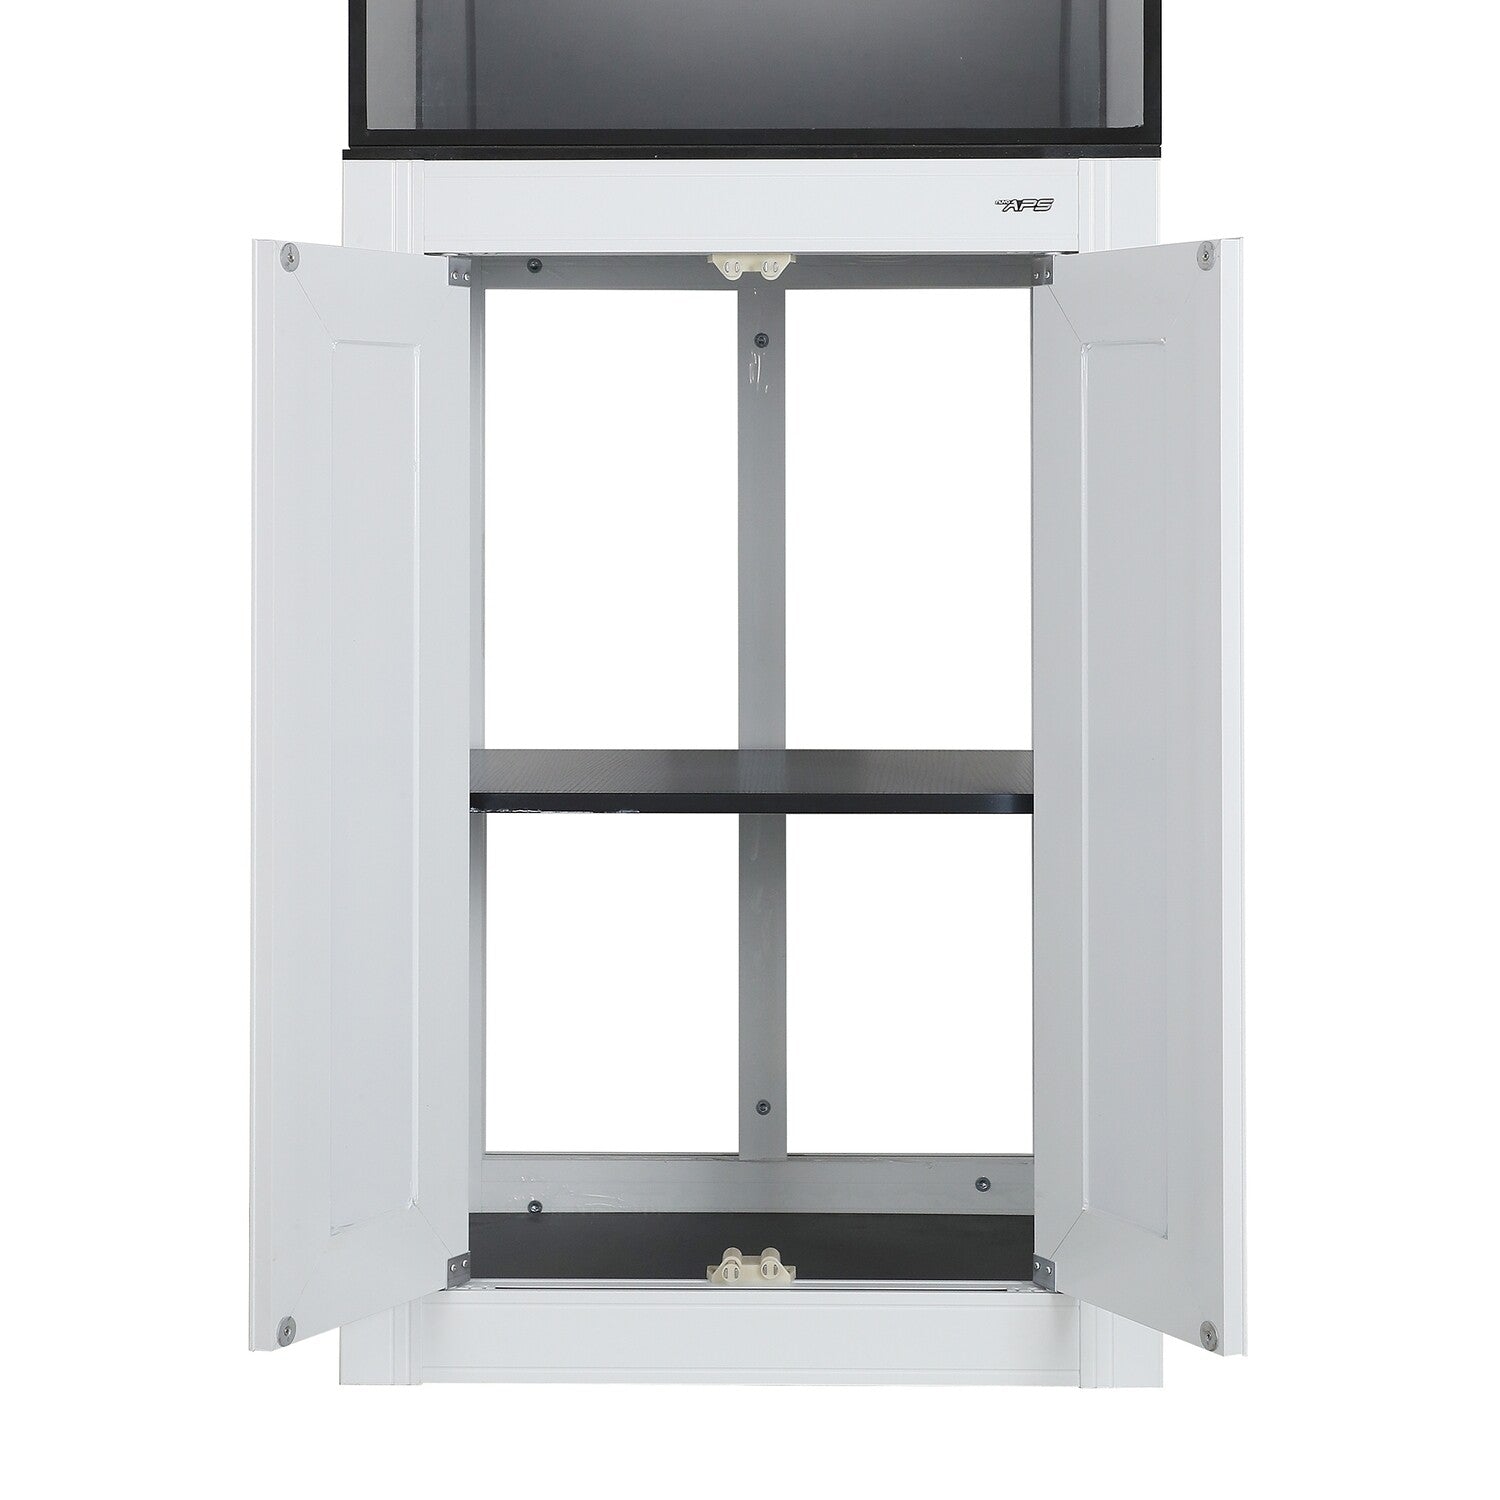 Innovative Marine NUVO Fusion 25-40 APS Stand - White